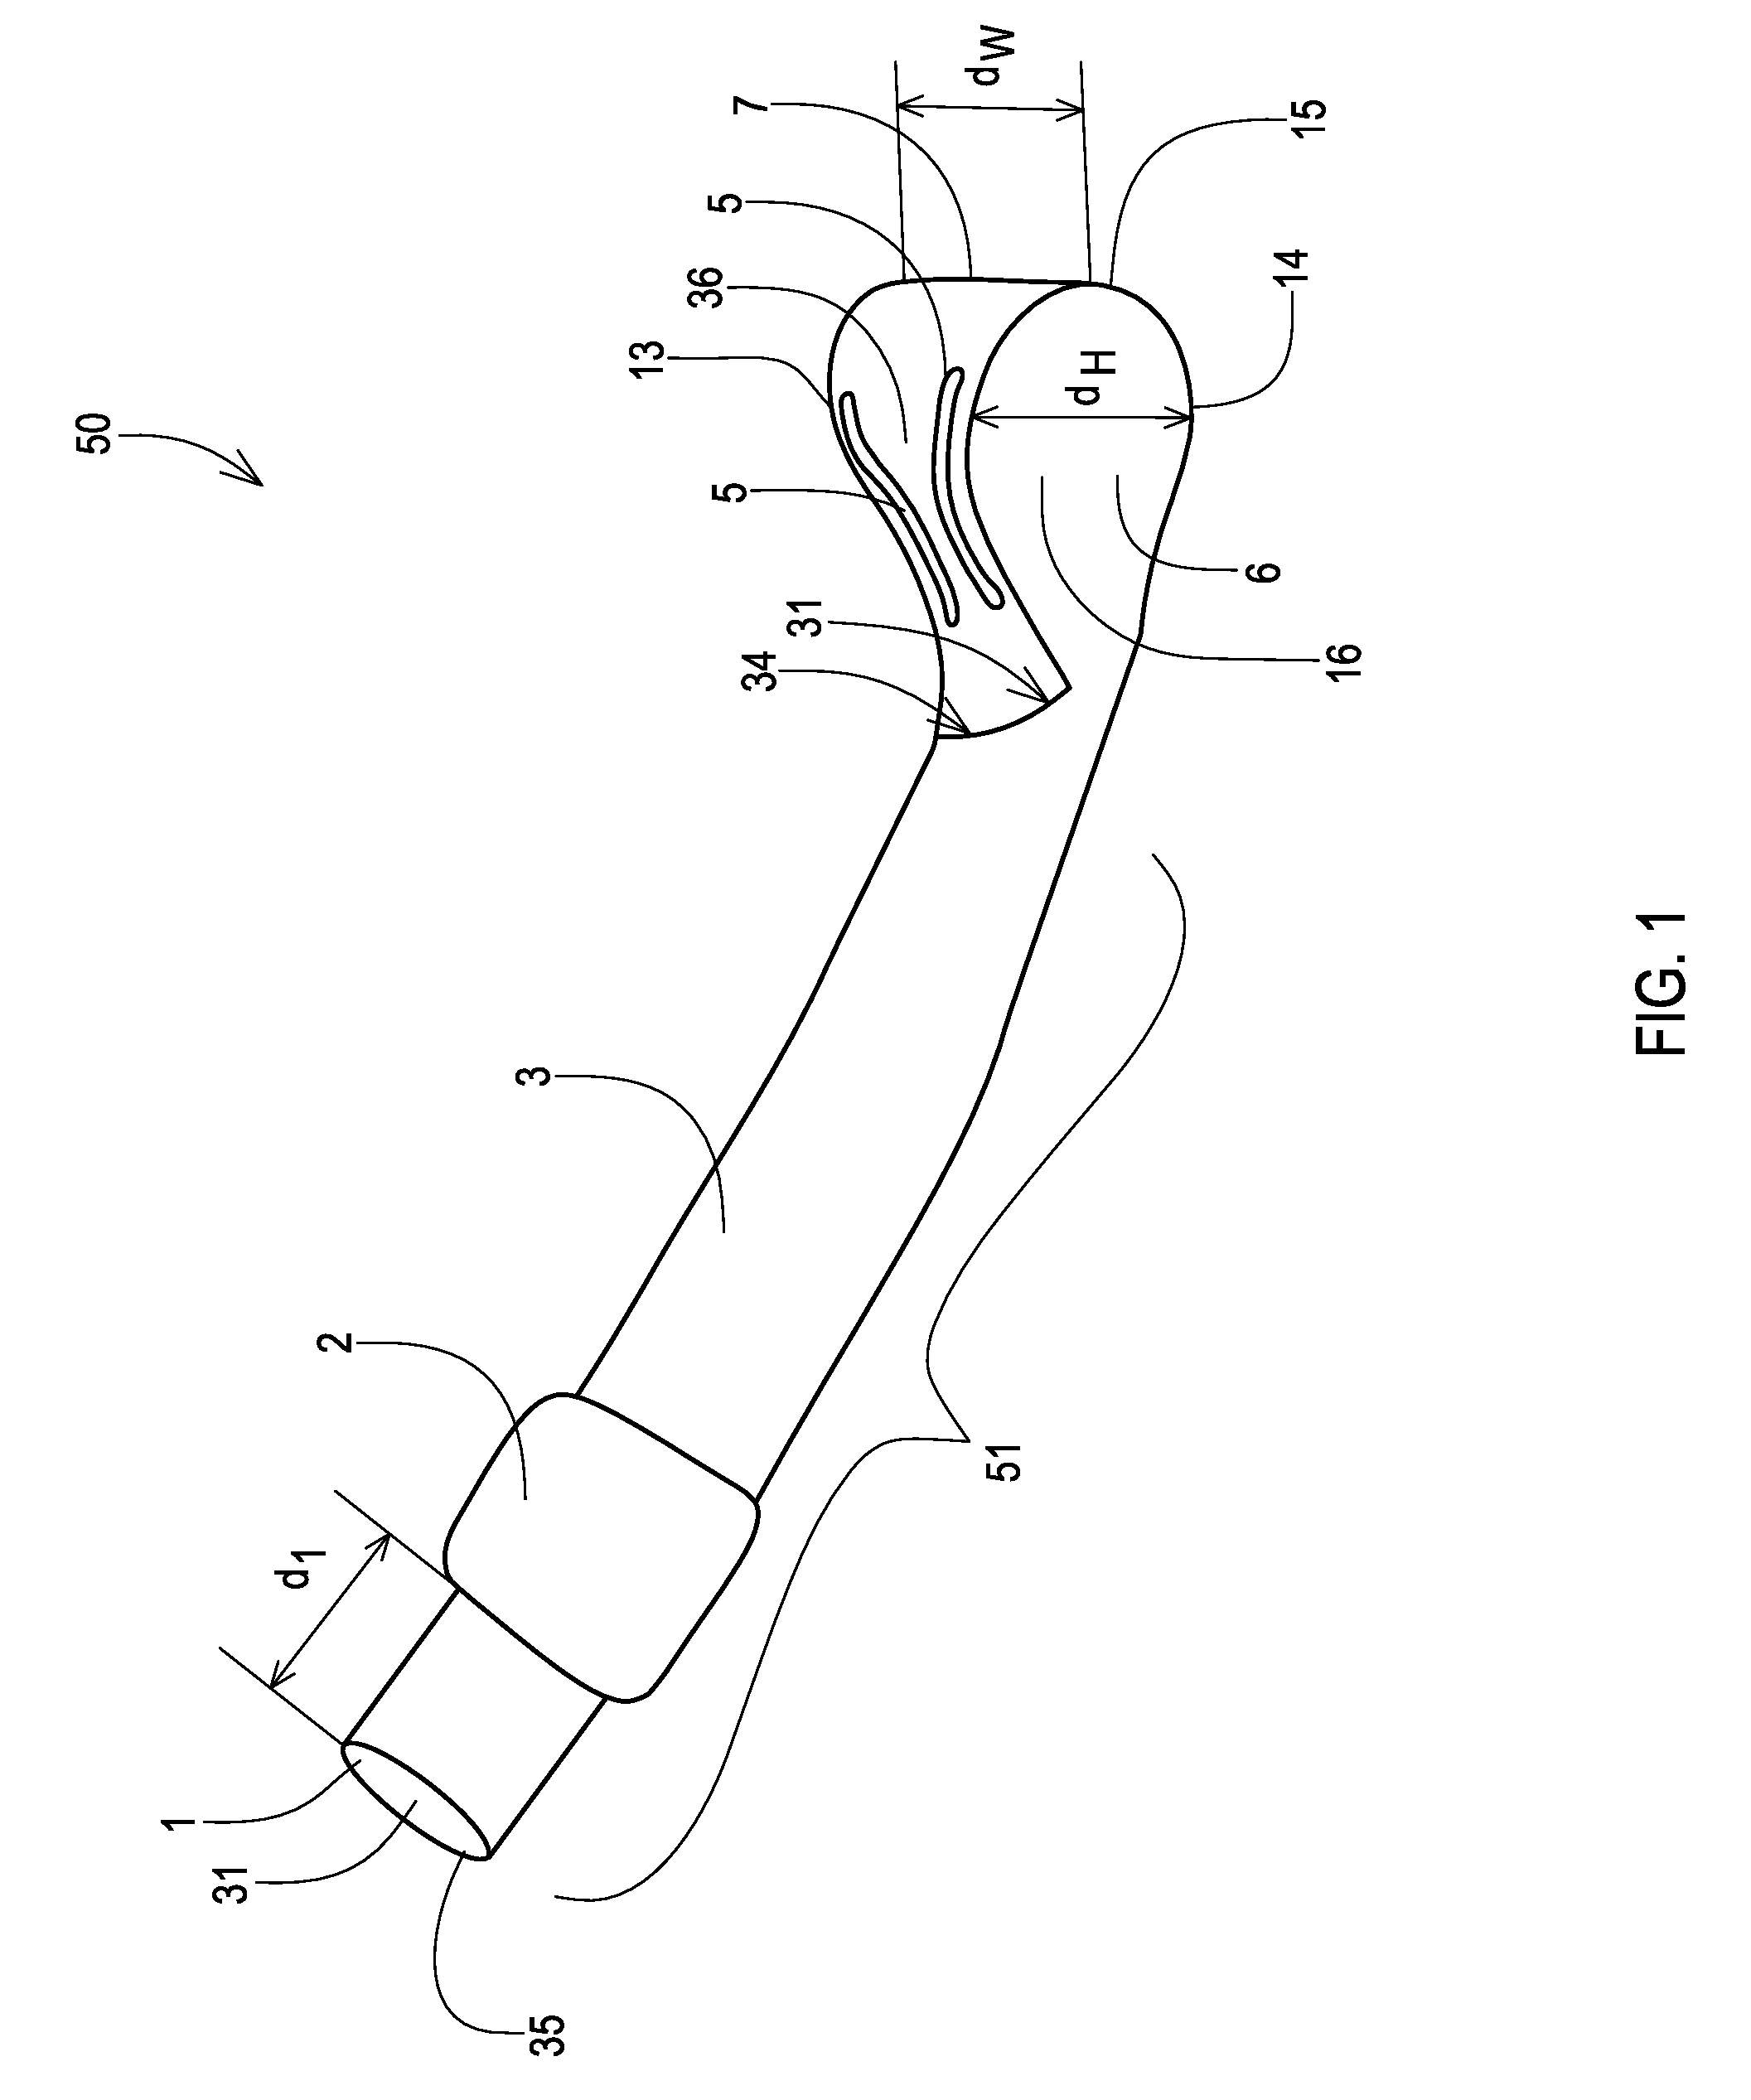 Airway Devices, Tube Securing Devices, and Methods of Making and Using the Same